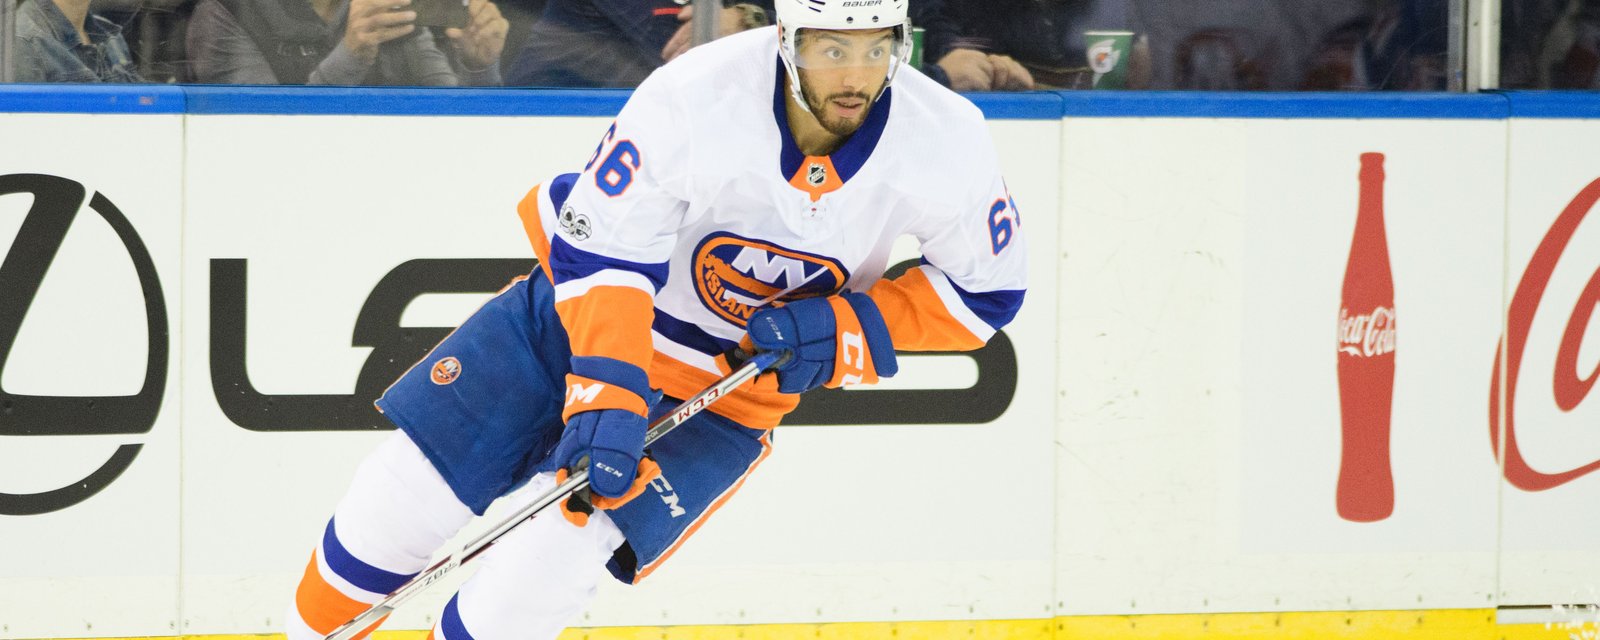 The Islanders appear to be done with Josh Ho-Sang